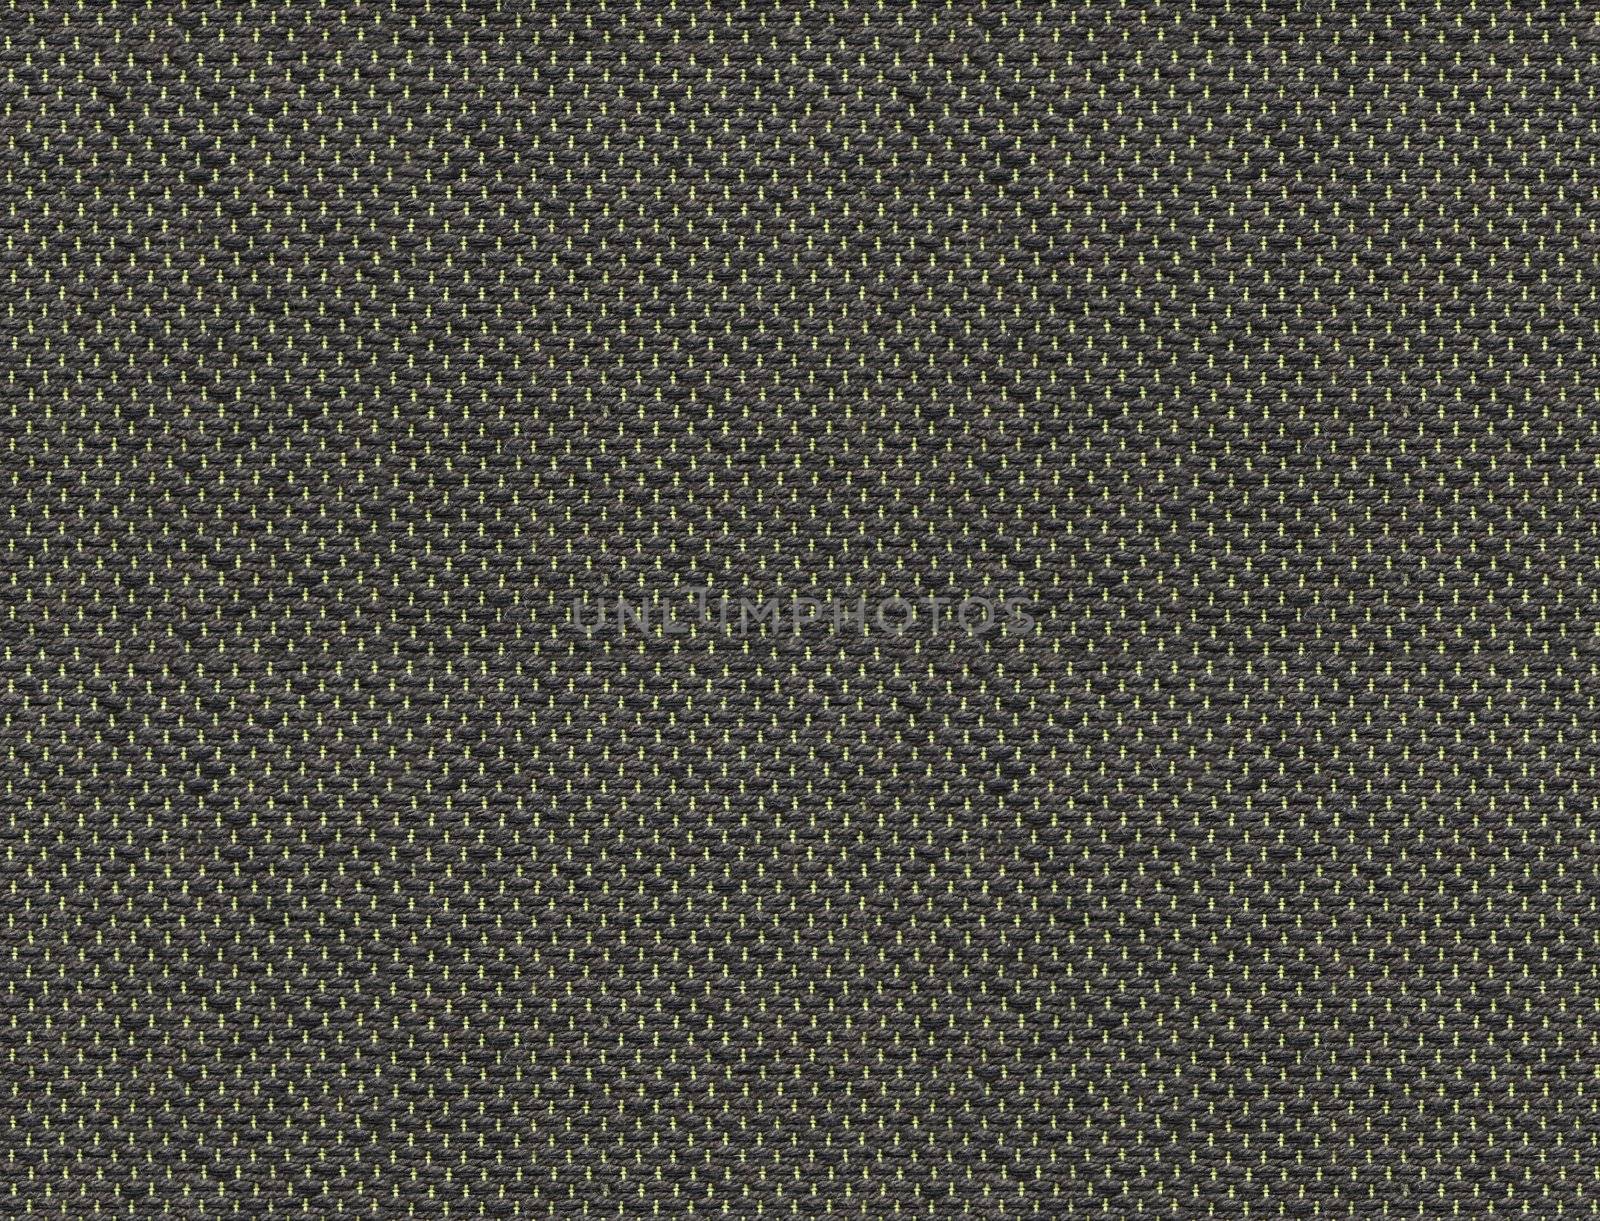 Dark fabric texture that perfectly loop by shkyo30